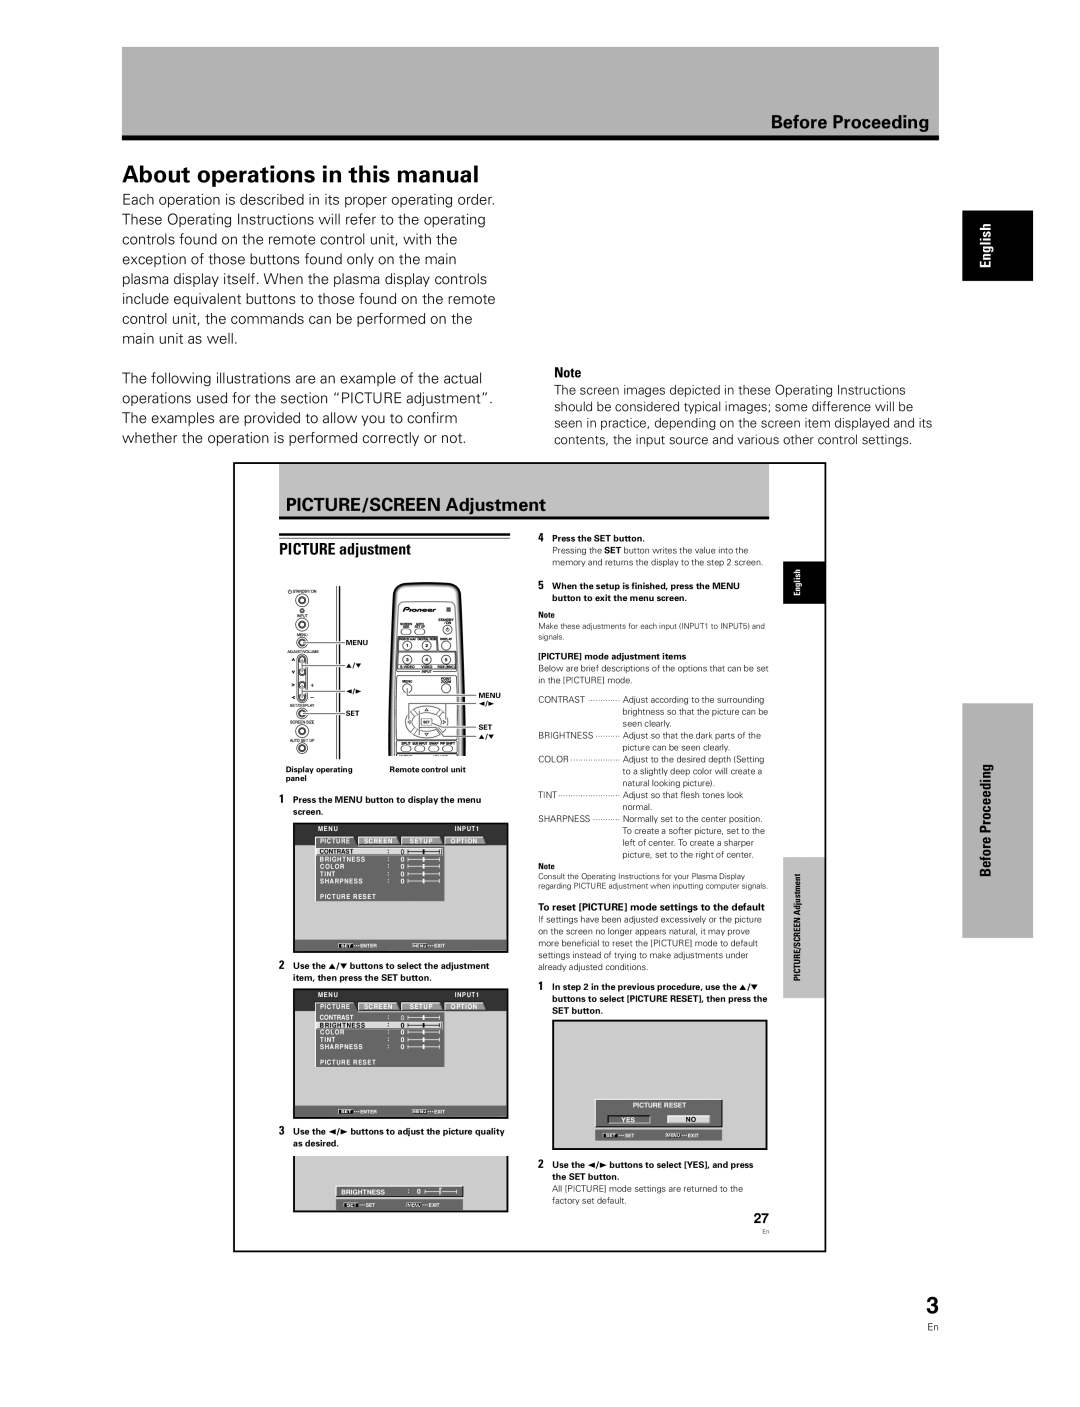 Pioneer PDA-5003 About operations in this manual, Before Proceeding, PICTURE/SCREEN Adjustment, PICTURE adjustment 